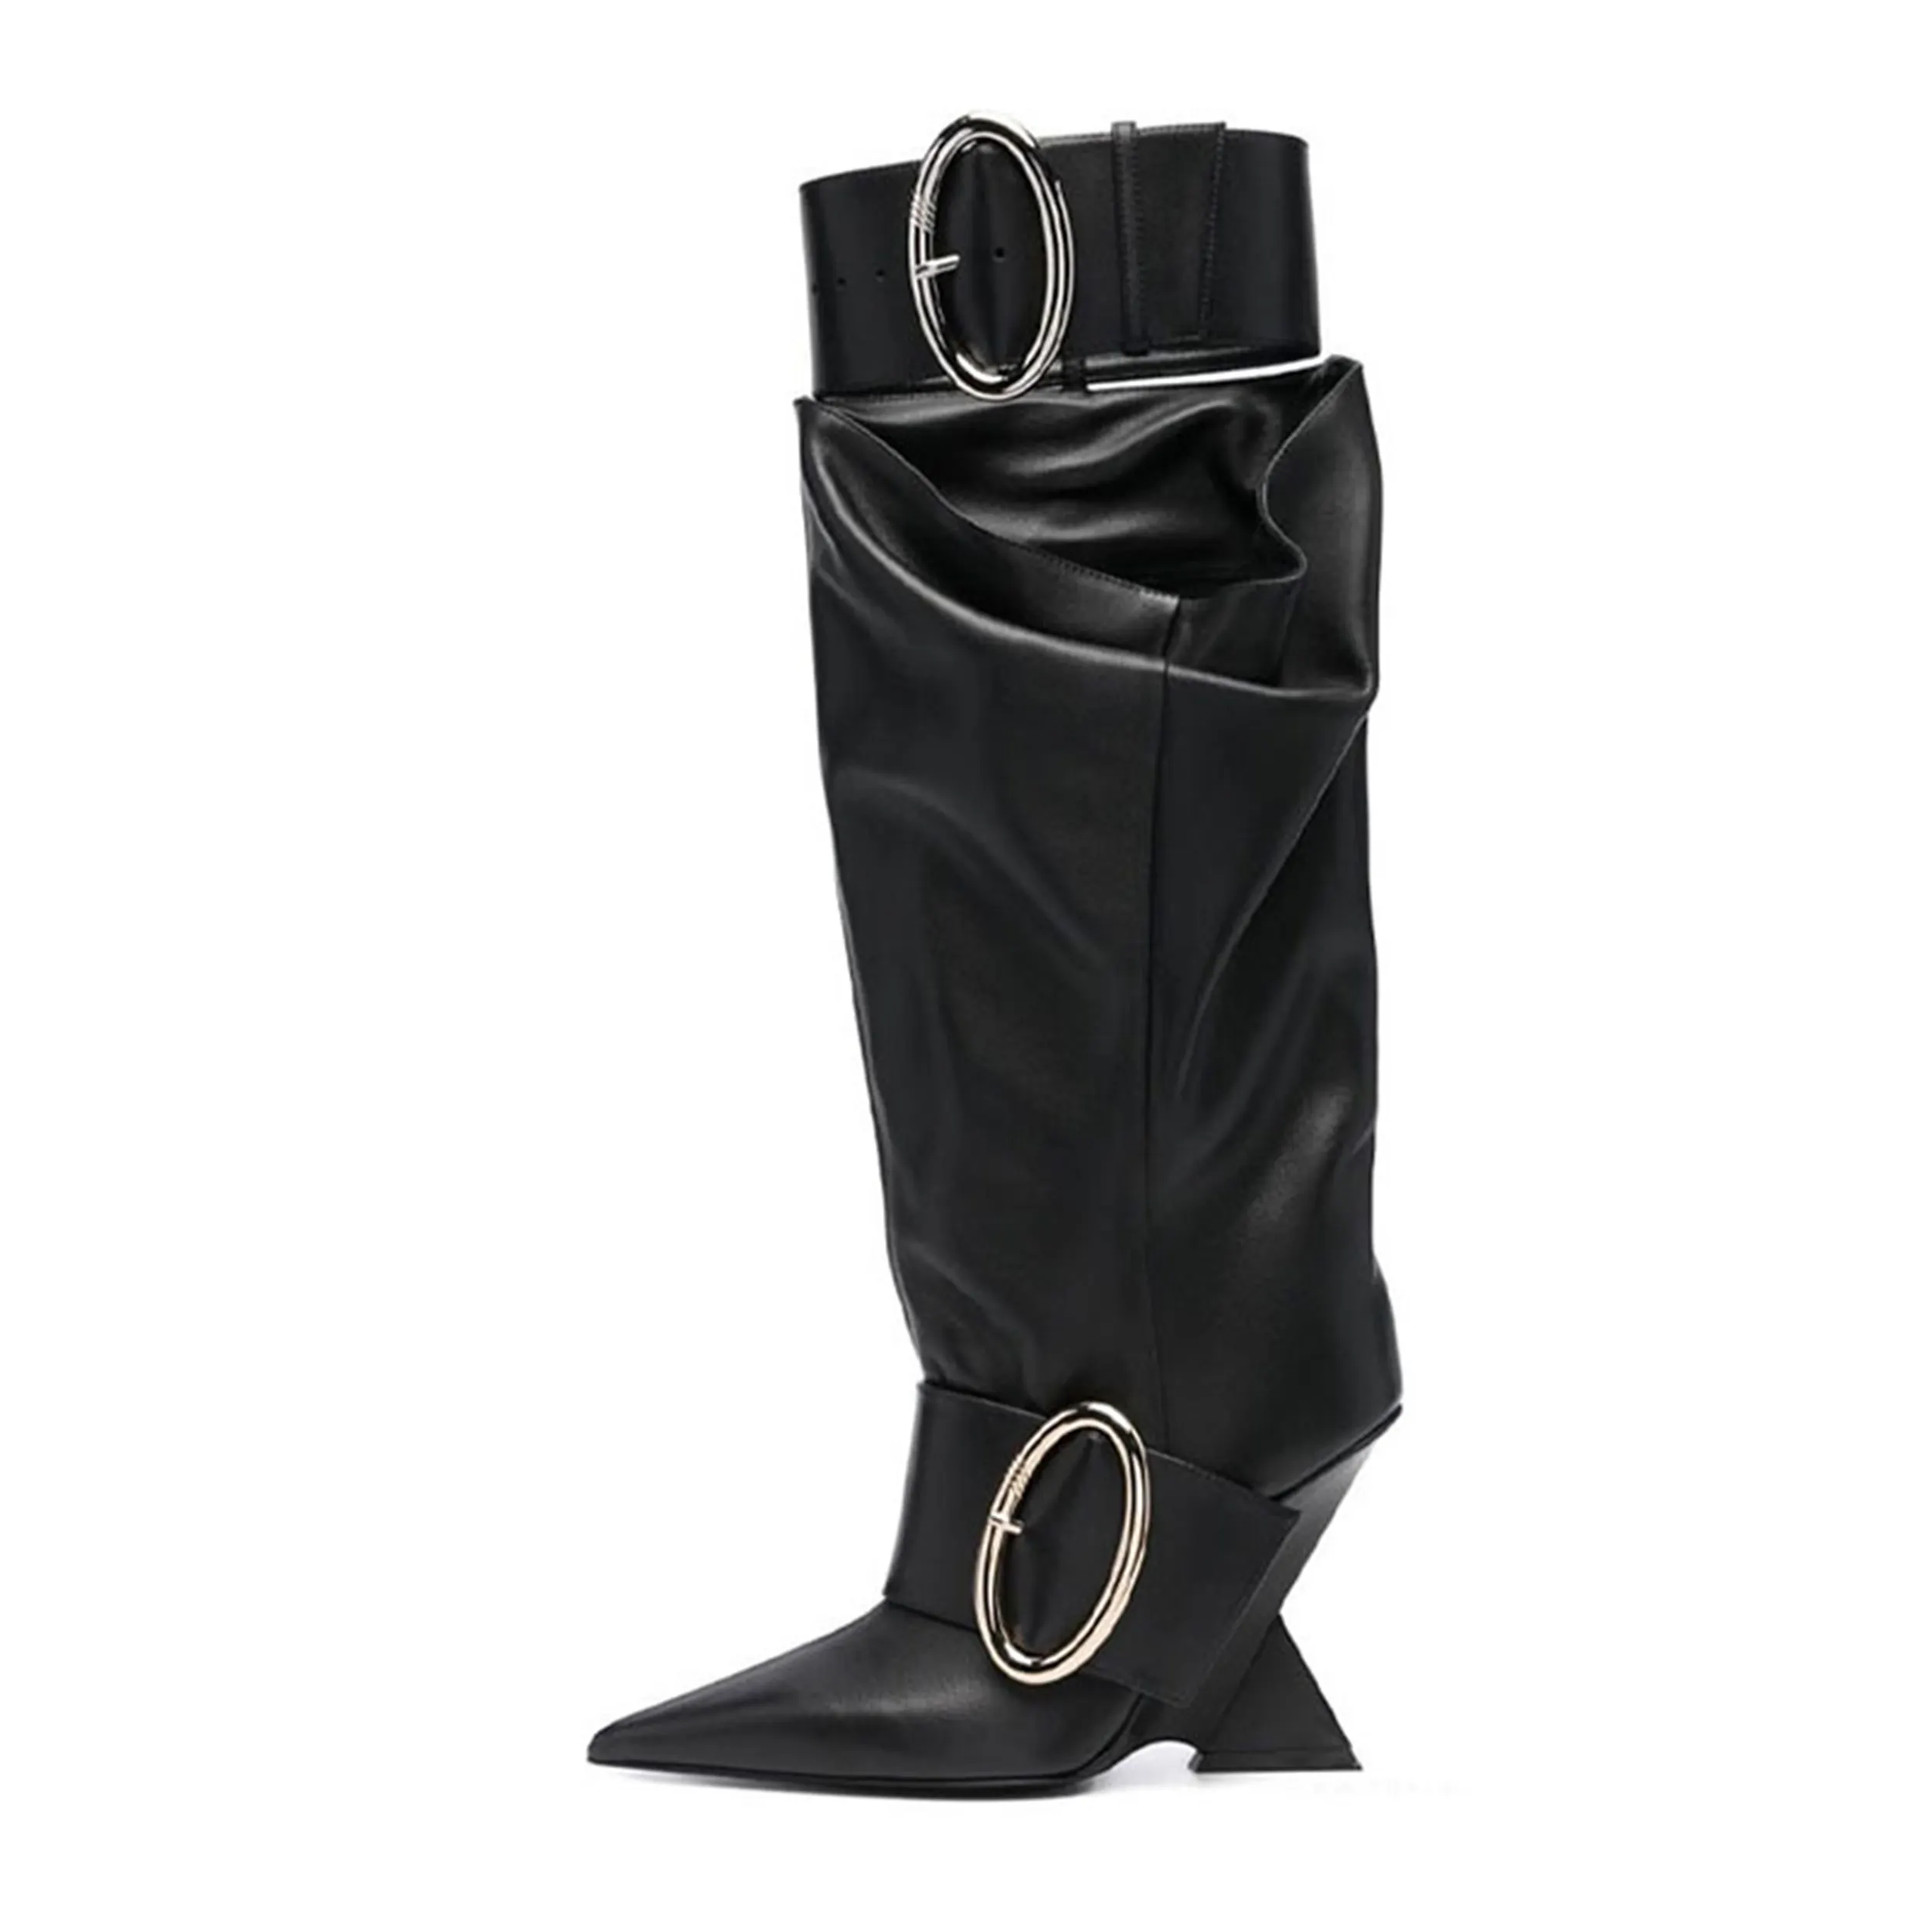 High-quality Buckle Boots Woman Knee High With Pointy Chic Wedge Heels Women's Boots Dress Designer Knee Boots High Heels